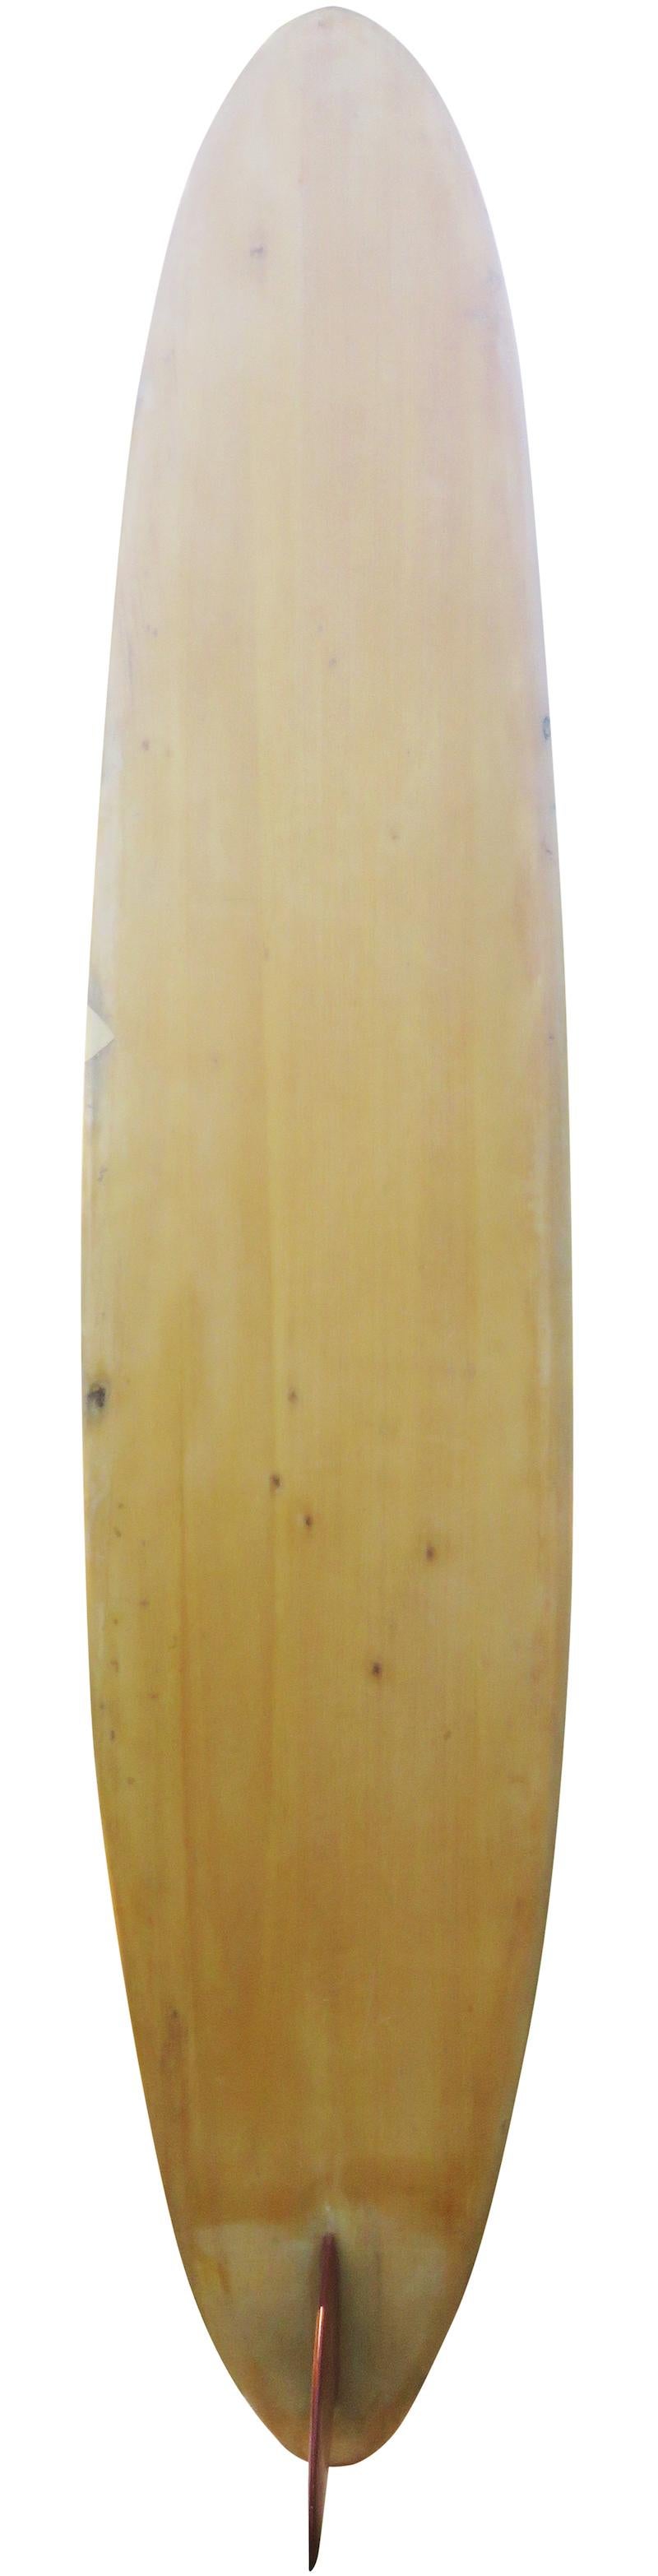 Mid-1950s vintage Velzy and Jacobs solid wood longboard surfboard. Features a balsawood shape with redwood fin and rare Velzy & Jacobs logo variation. Dale Velzy and Hap Jacobs teamed up for a brief period in the mid-1950s to produce wooden